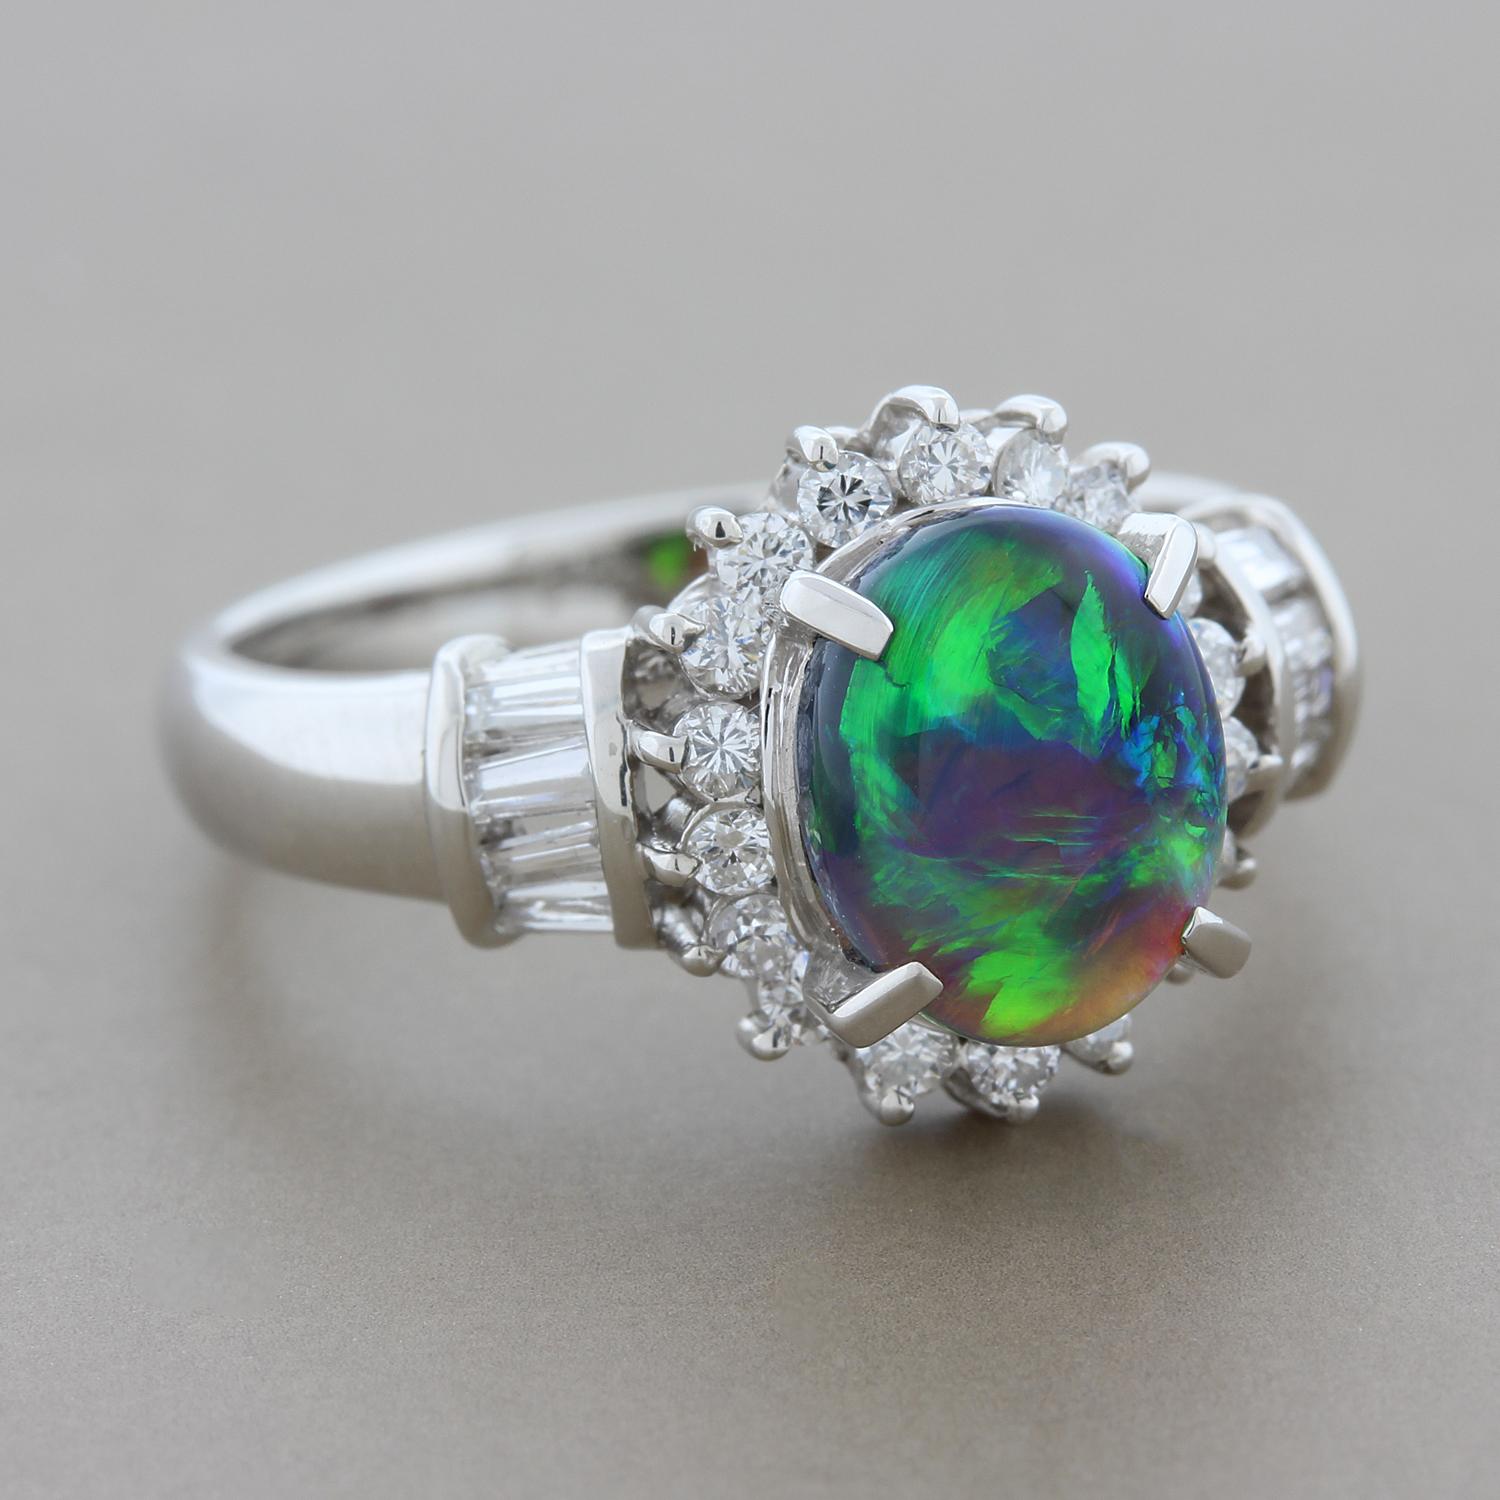 A captivating 1.26 carat Australian black opal with intense play of color showing big flashes of blue and green. The opal is haloed by round cut diamonds and baguette cut diamonds set in the shoulders of the platinum ring, totaling 0.46